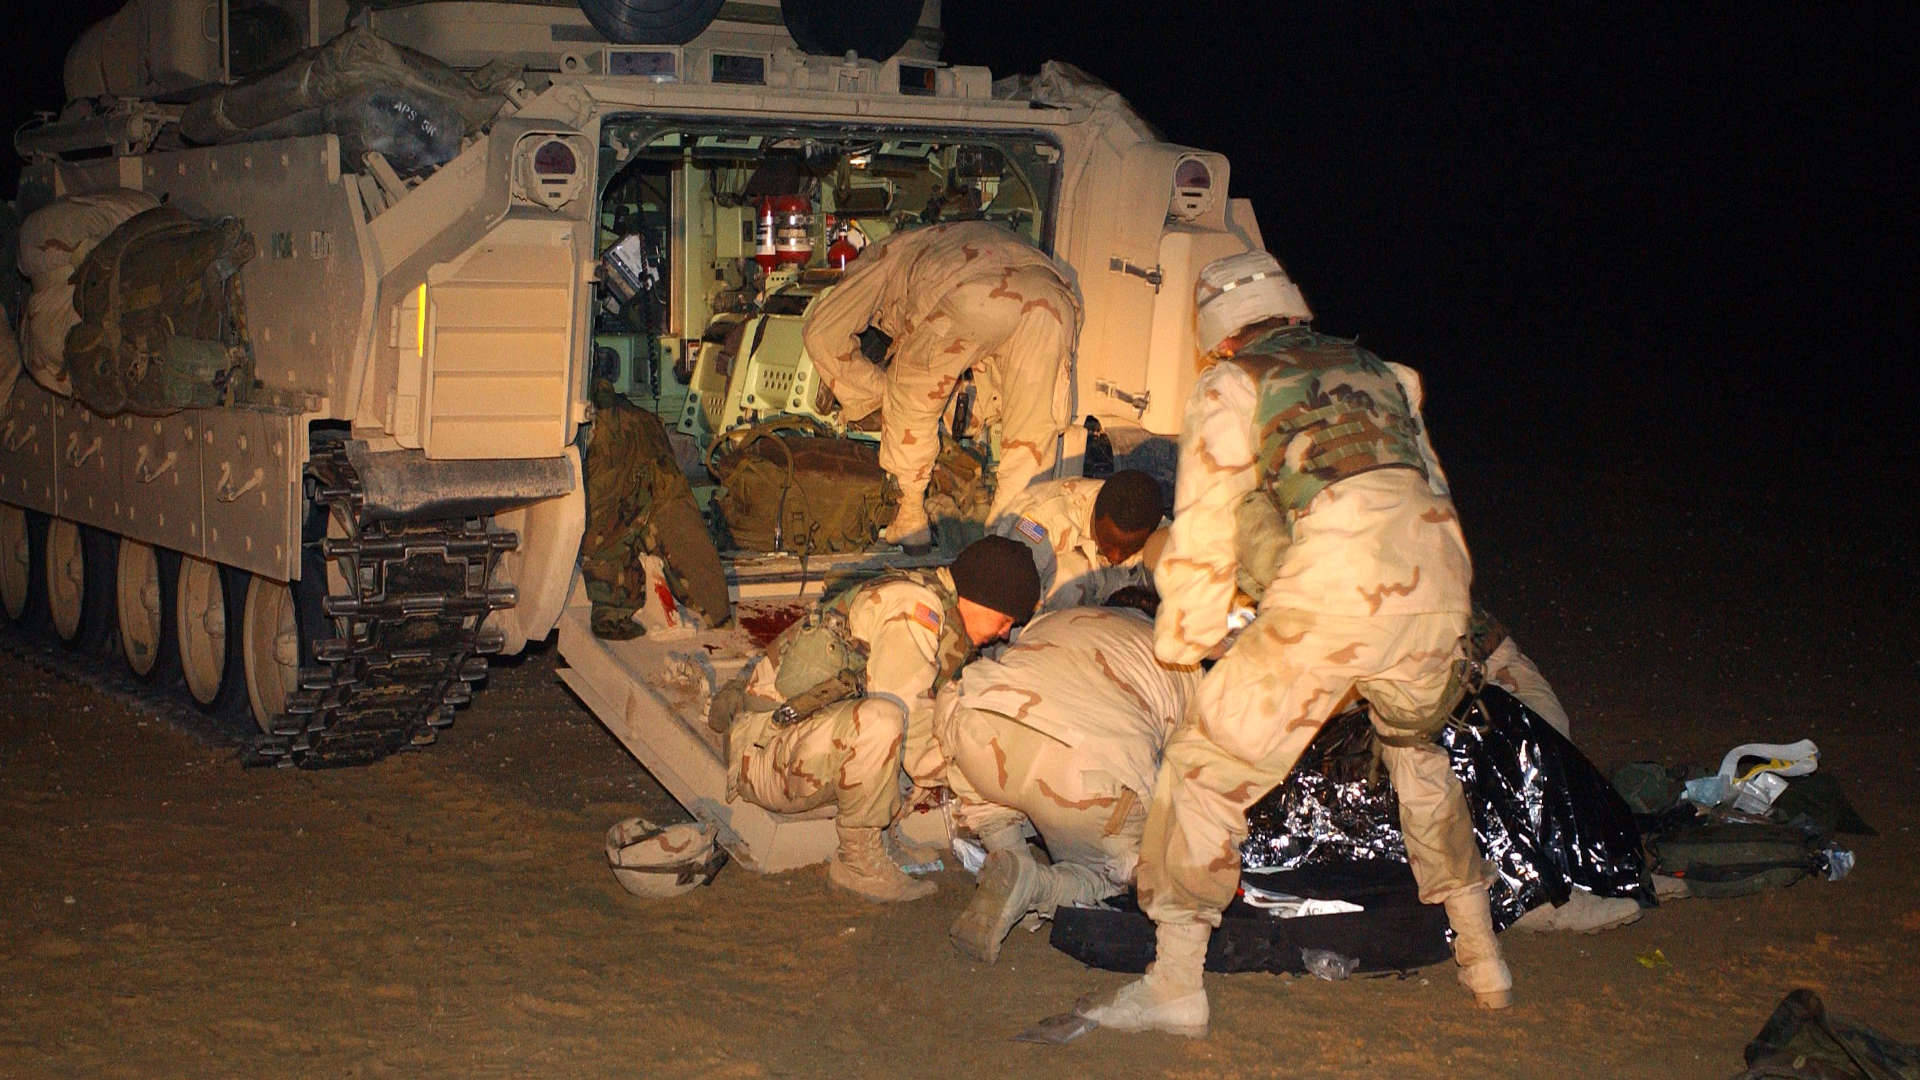 Medics treat an unidentified U.S. infantry soldier after he suffered injuries during a 2003 training accident near the Iraqi border in Kuwait.